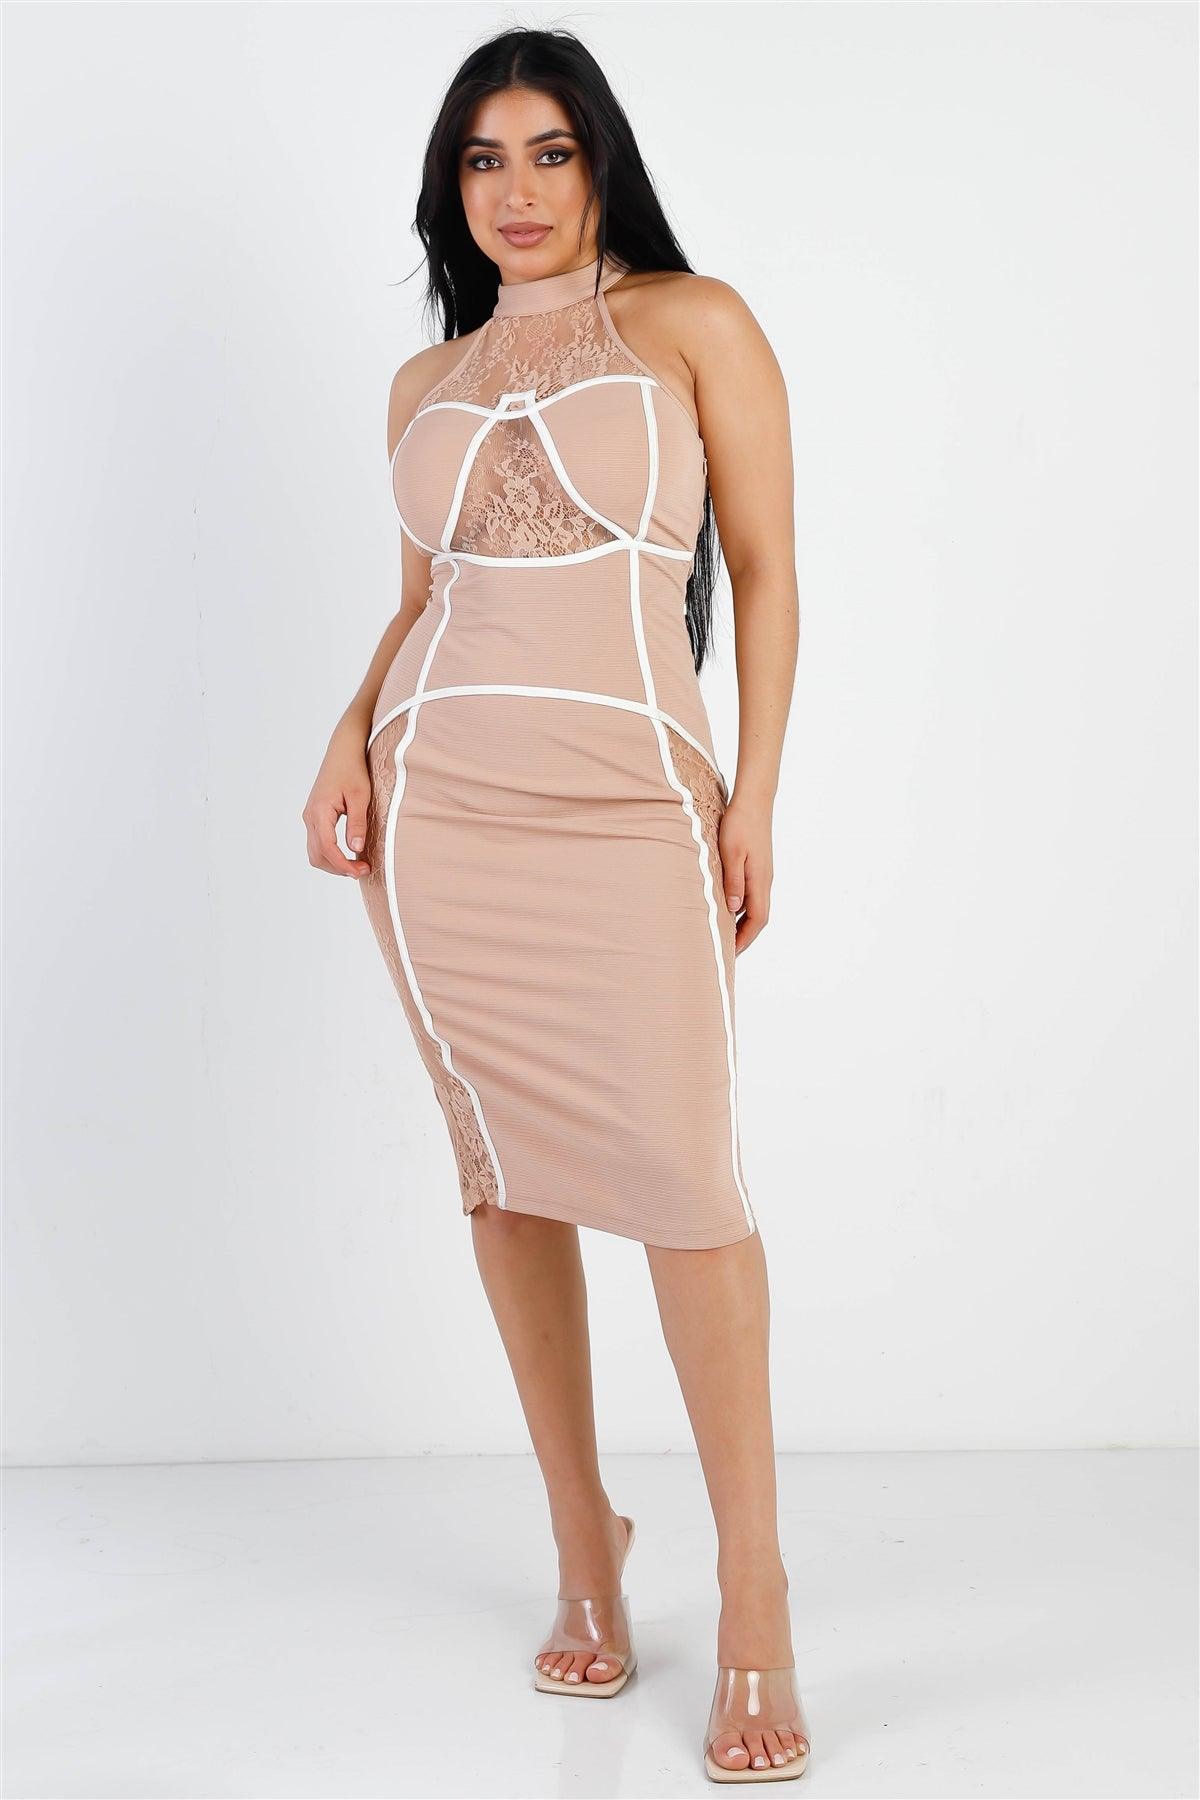 Nude Textured Lace Inserts White Stitch Details Back Lace Up Bodycon Midi Dress /3-2-1